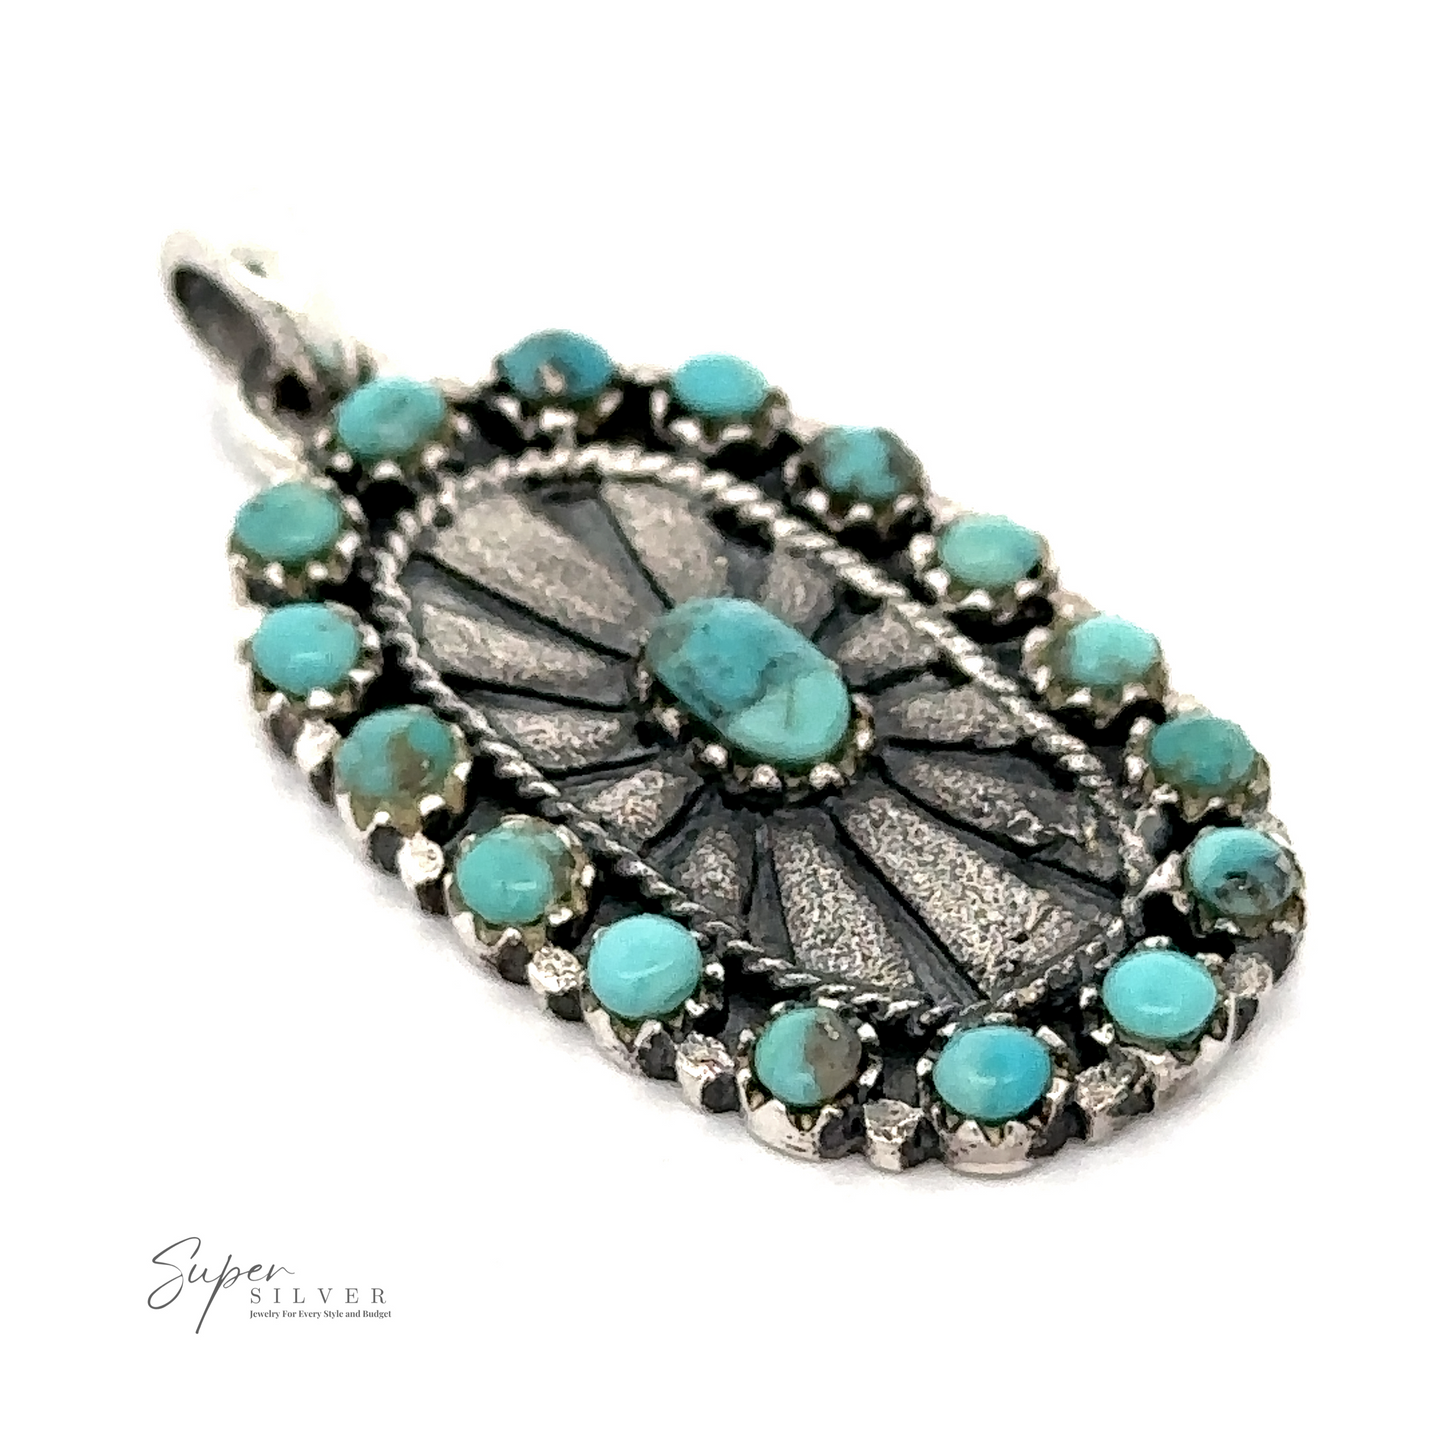 An oval-shaped Native Inspired Turquoise Pendant with turquoise stones arranged around the edge and a central turquoise stone, featuring a sunburst design. This Native-inspired piece exudes Southwestern charm, complete with the "Super Silver" logo in the corner.